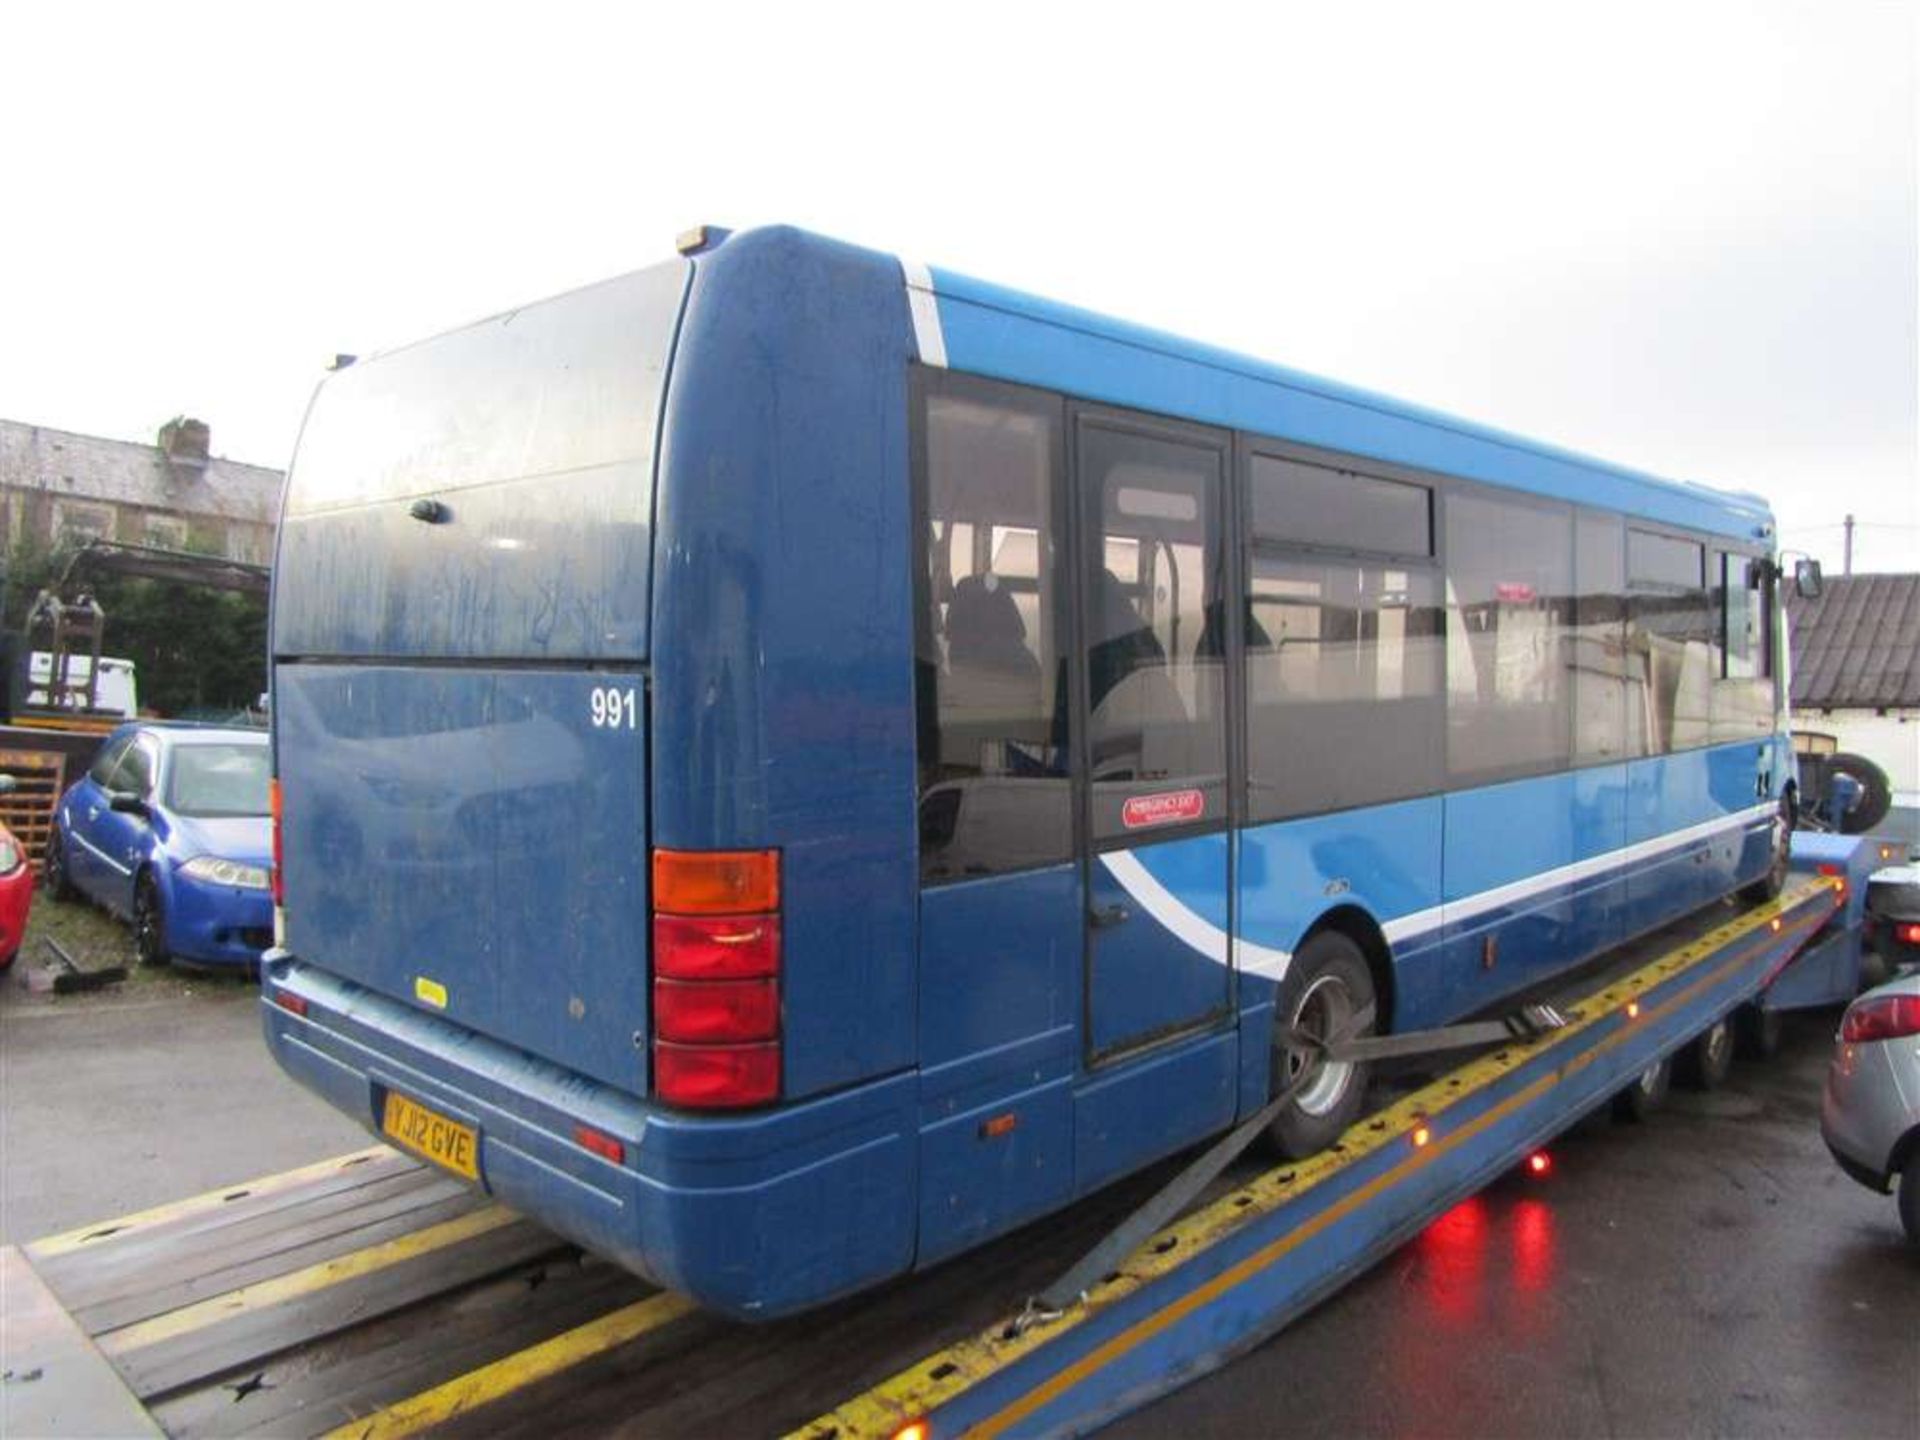 2012 12 reg Optare Solo M950 Electric Bus (Believed to be Running But Needs Charging) - Image 4 of 6